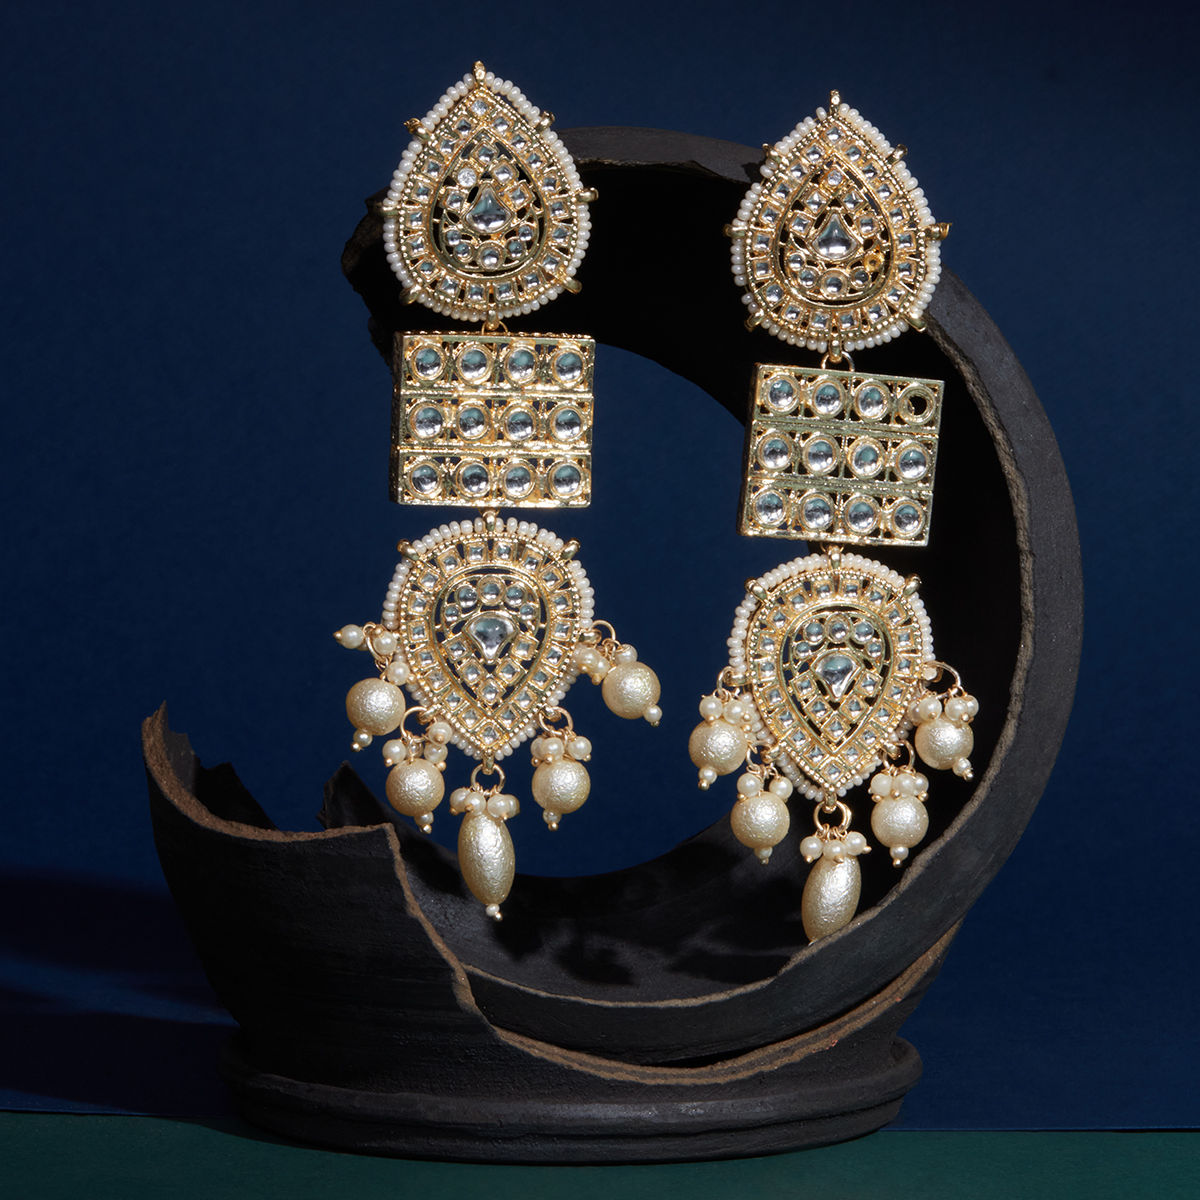 Buy White Gold Tone Kundan Earrings with Pearls Online at Jayporecom